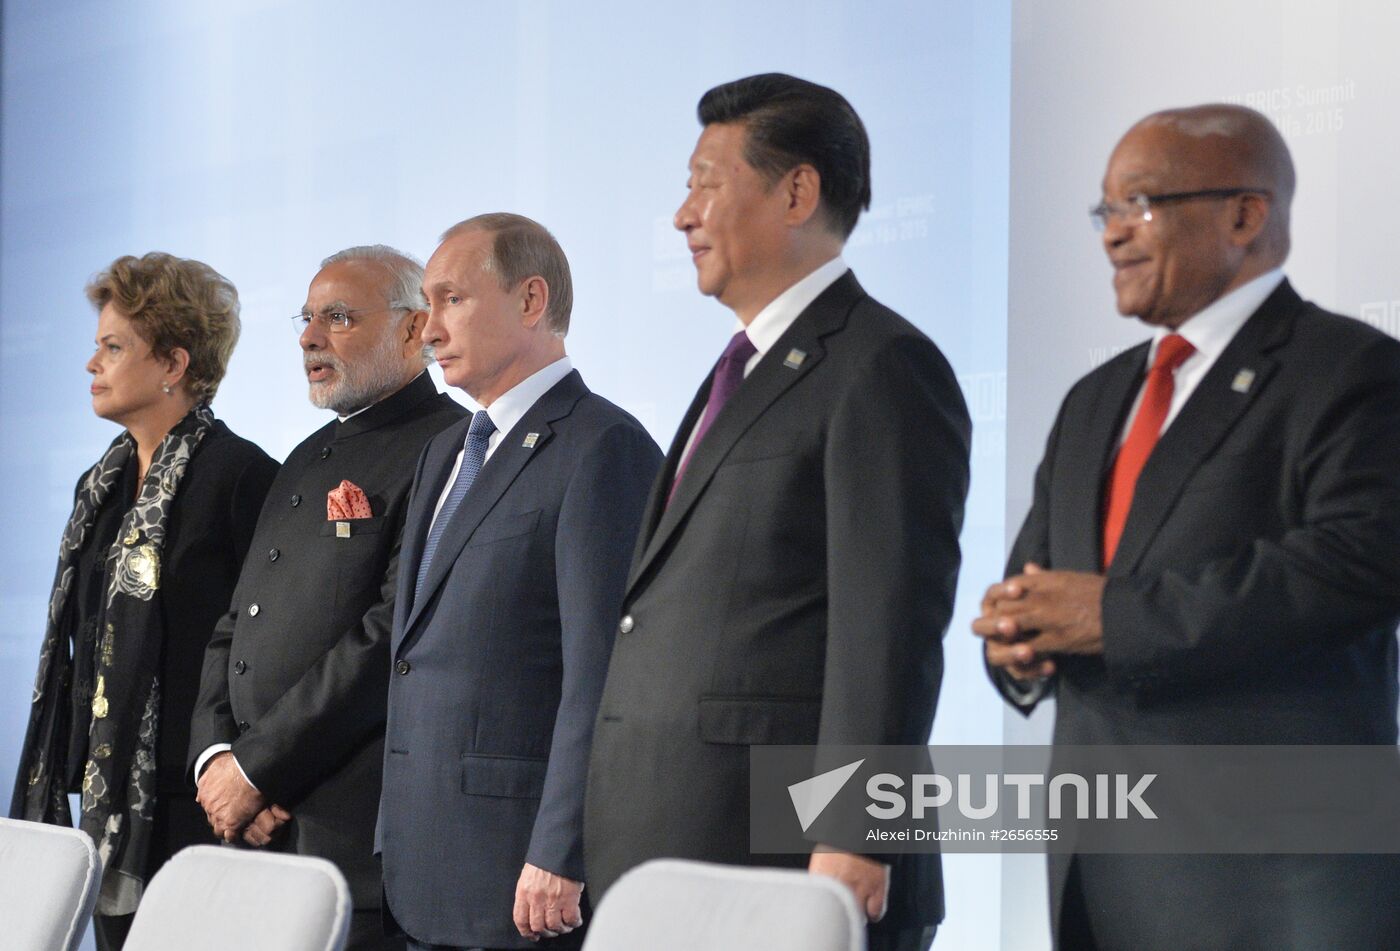 Signing of joint documents following the BRICS leaders meeting